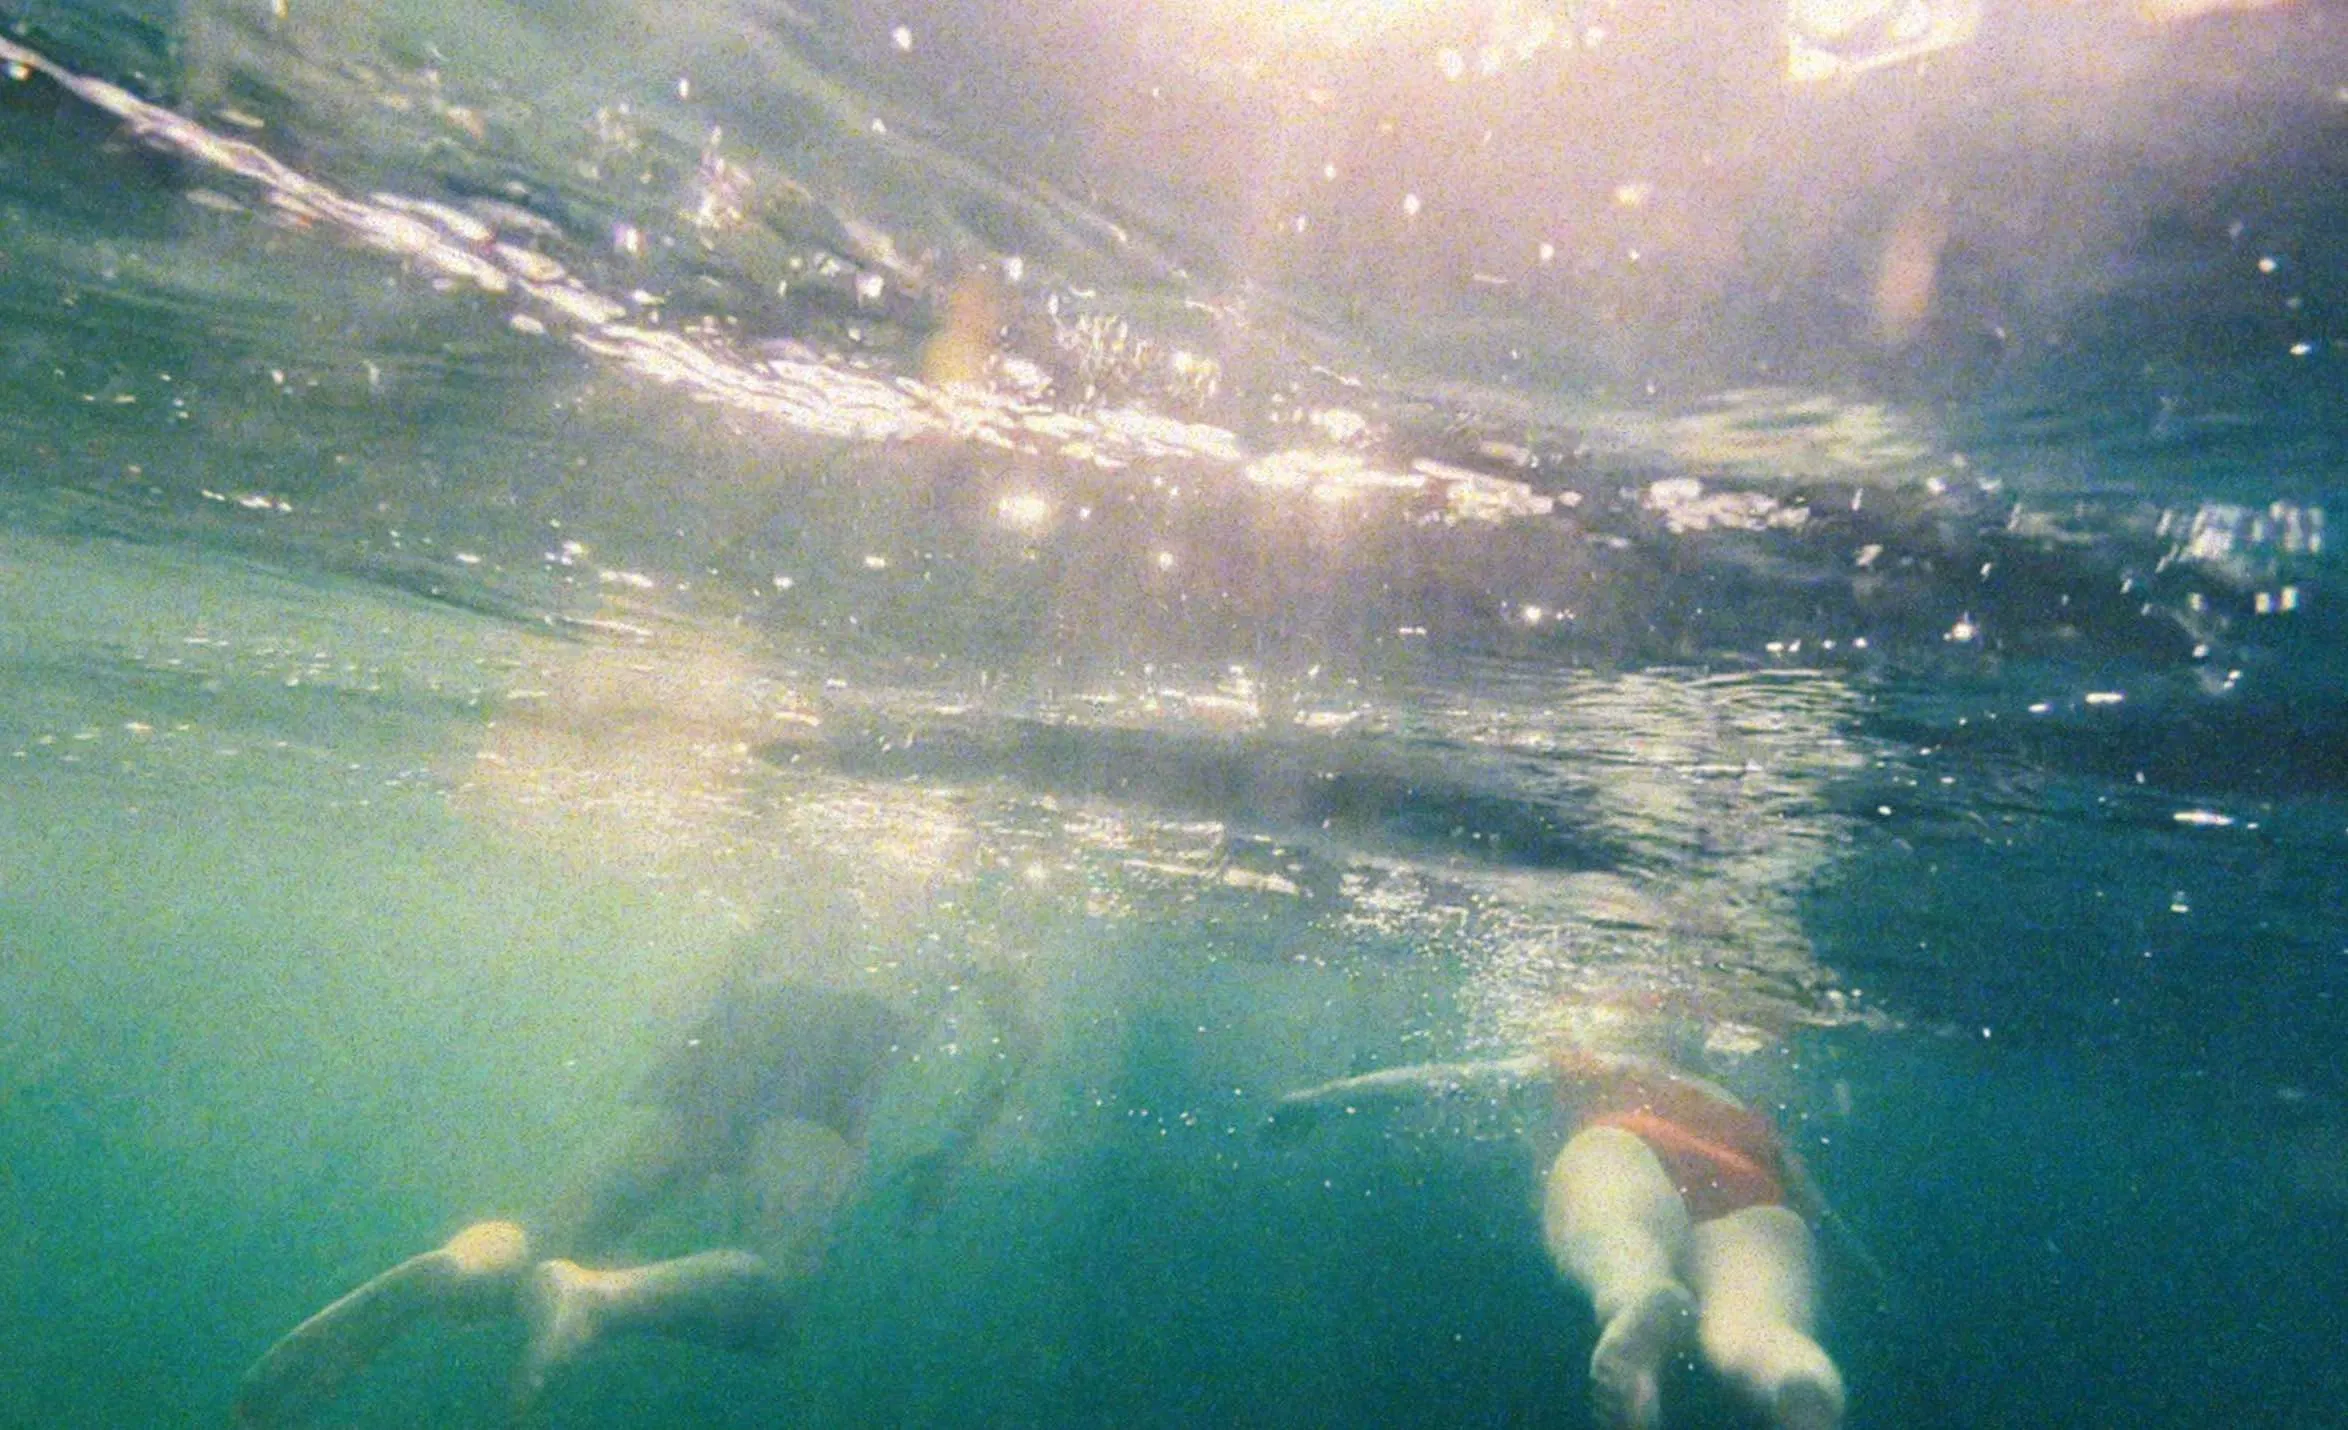 Unreachable love: Huang's parents swim away in Will You Look at Me / Photo by Shuli Huang, courtesy of The Sundance Institute